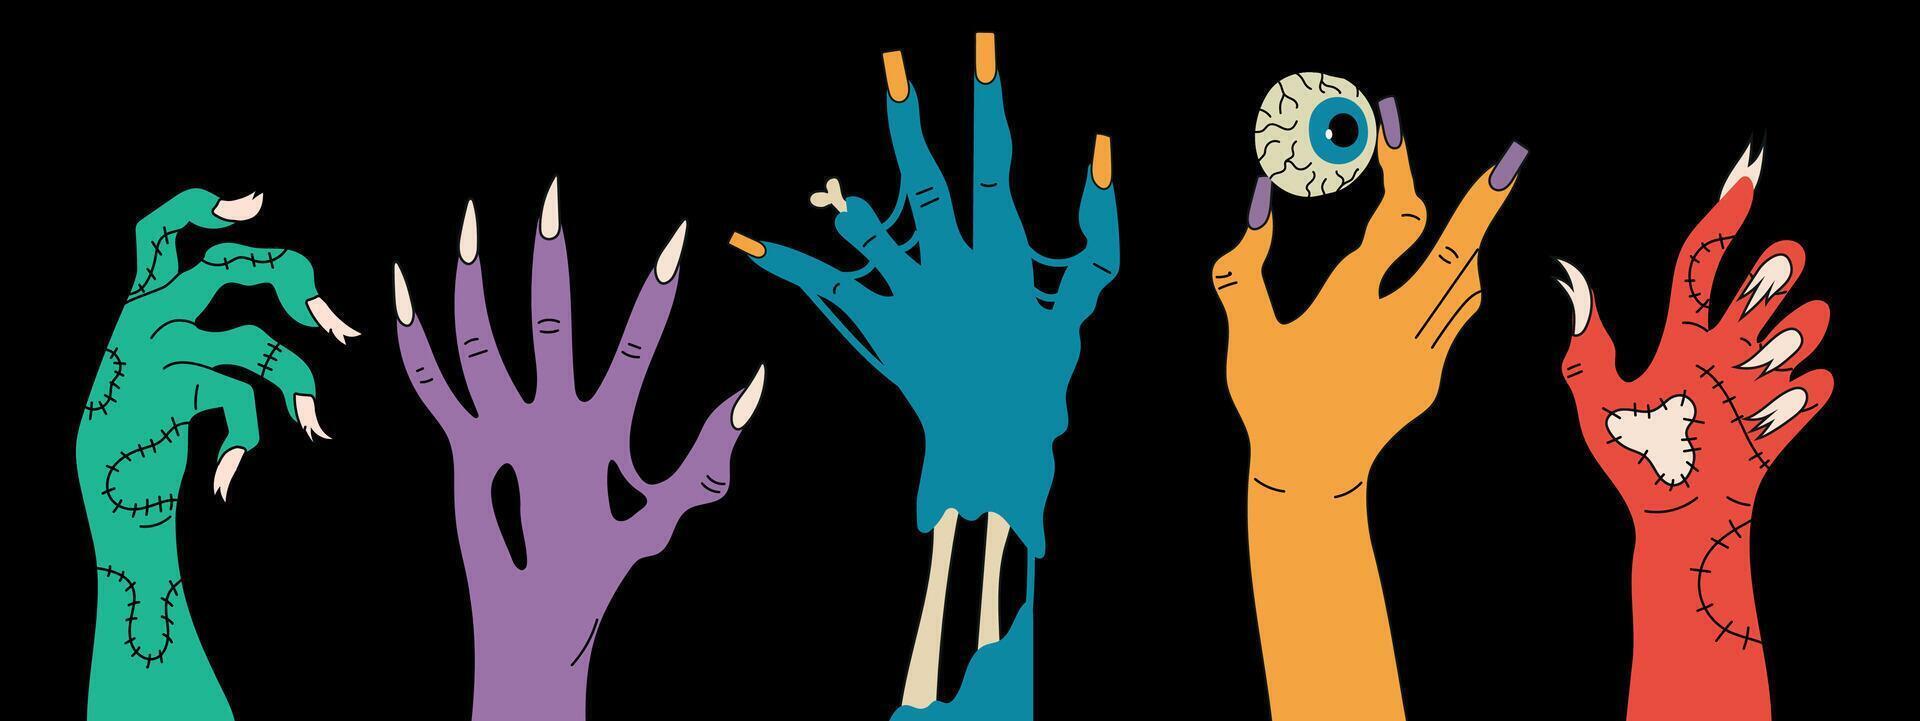 A set of zombie hands on a black background. Isolated collection of multi-colored hands with damage. Printing for Halloween party cards,T-shirts, stickers, mugs. Vector illustration.Halloween concept